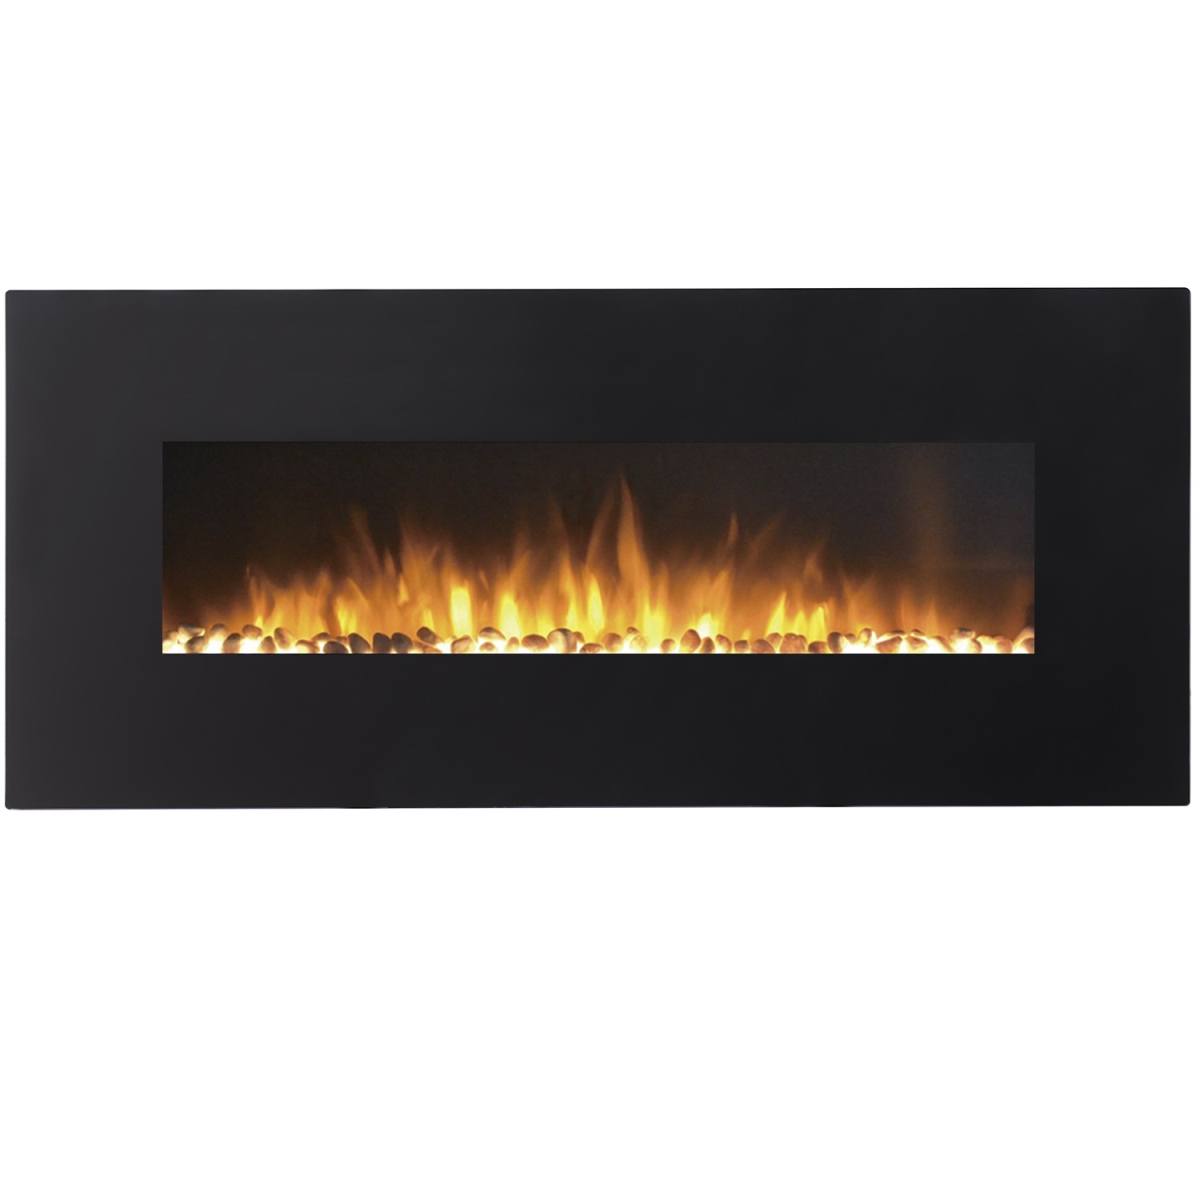 Lw5050pf-gl 50 In. Gl5050pf Milan Pebbles Electric Wall Mounted Fireplace, Black